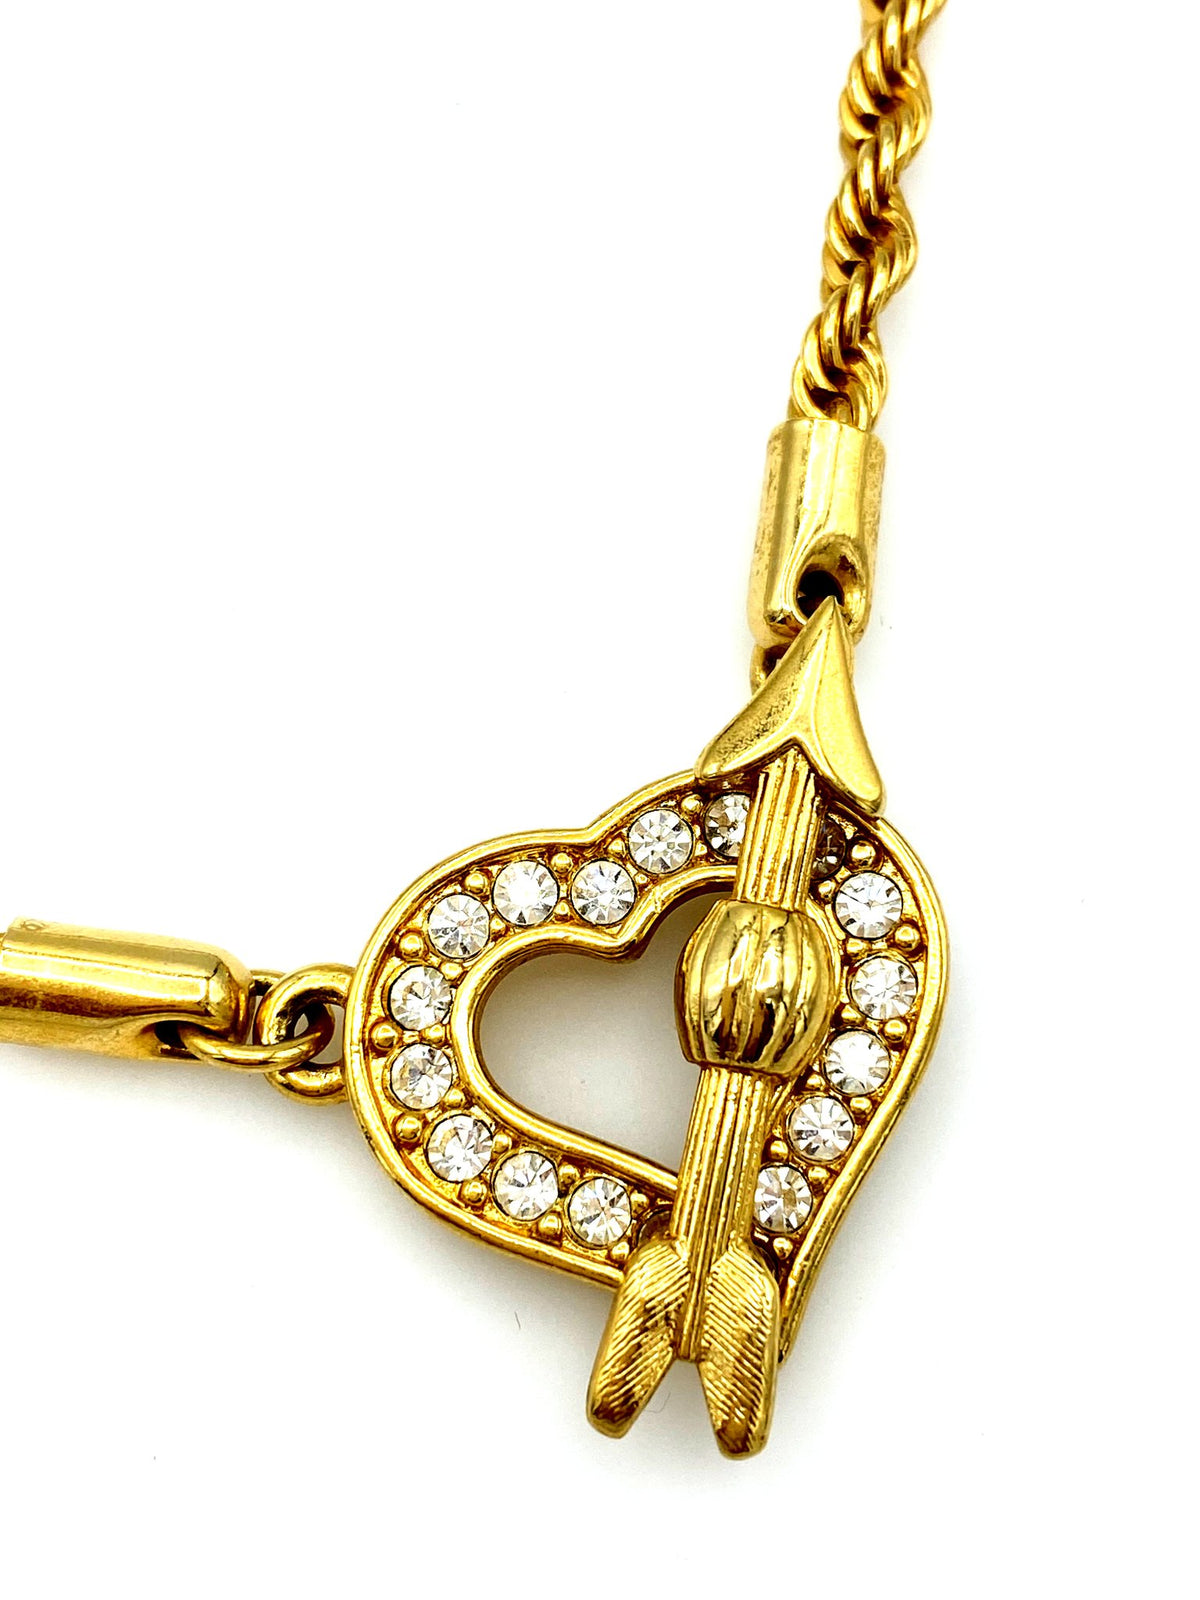 Swarovski White Crystal Open Heart Pendant Gold Rope Chain Necklace - 24 Wishes Vintage Jewelry